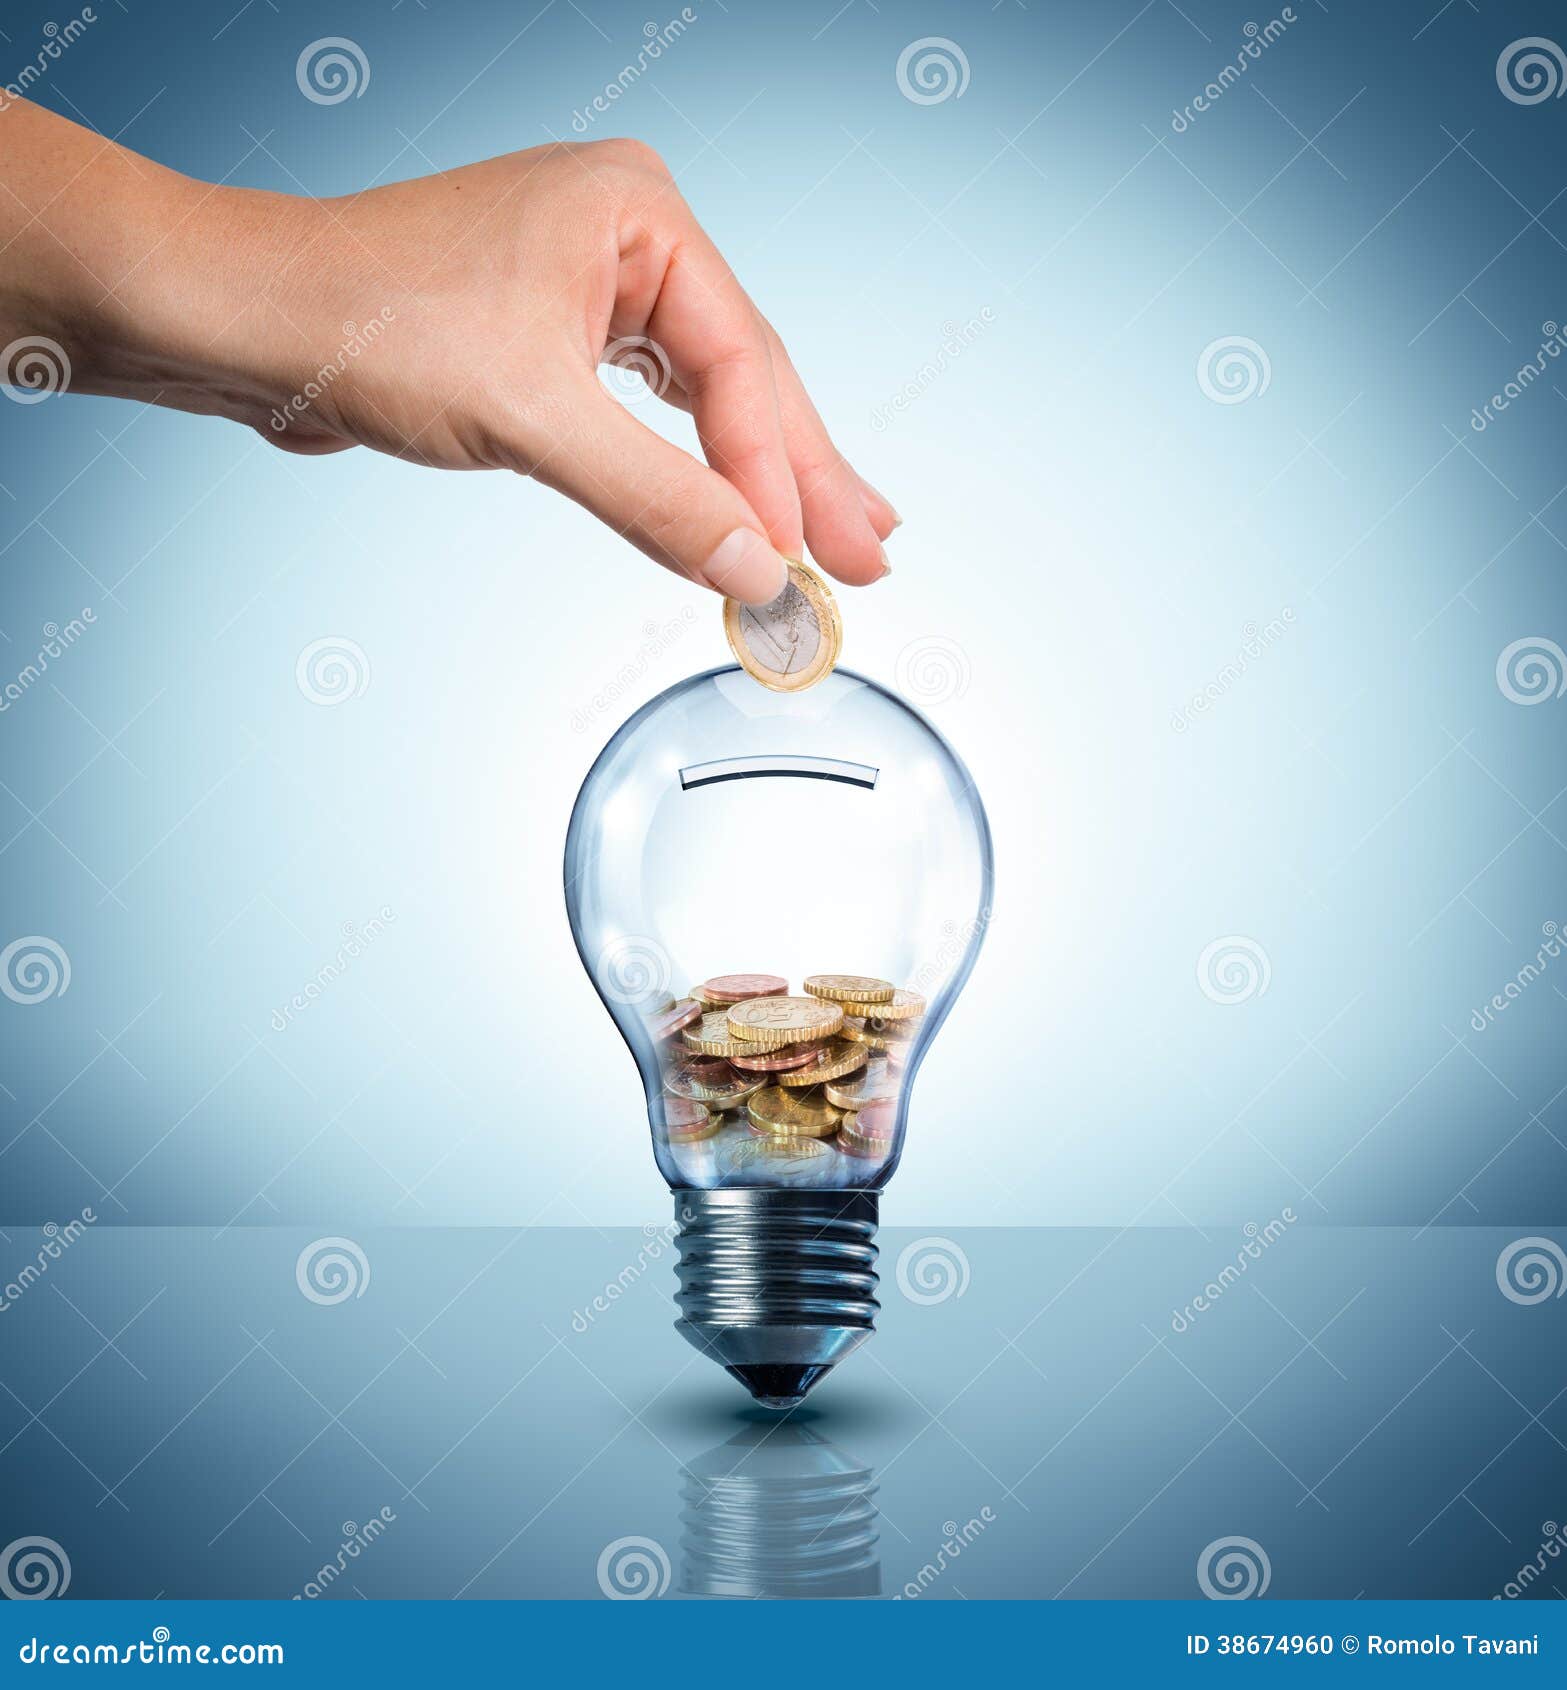 invest to energy concept - euro in bulb